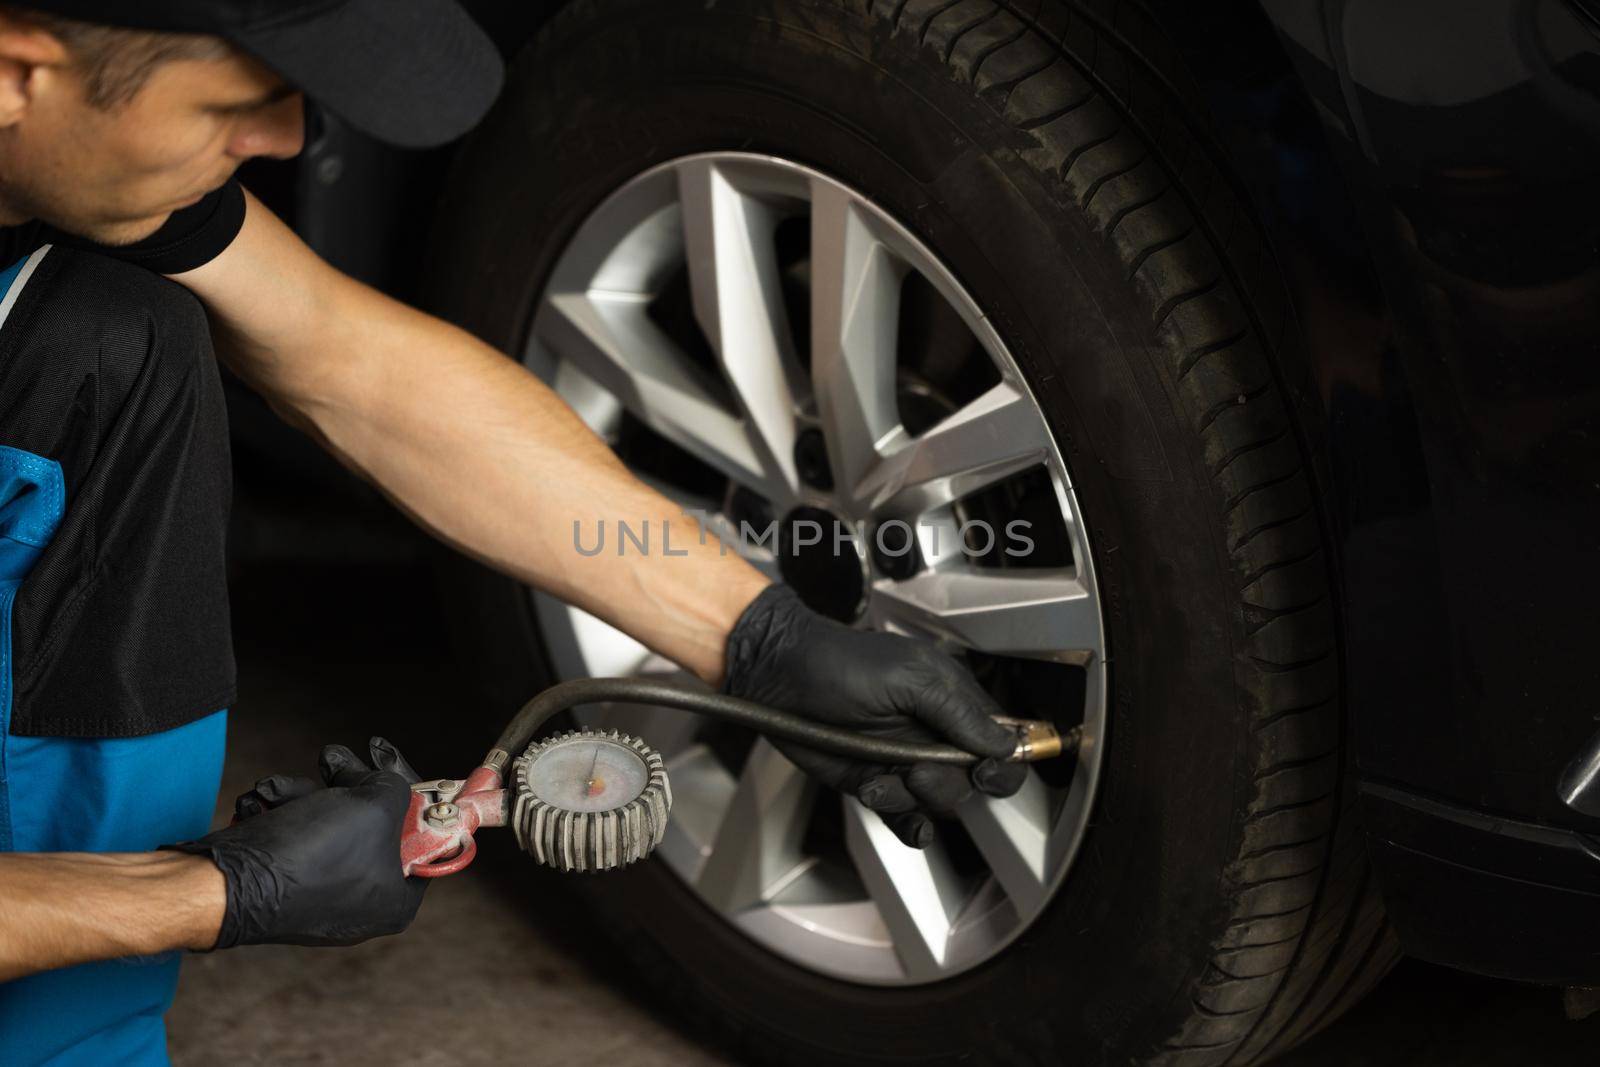 Gas pumping of a car wheel. Car tire inflation. Car tire pressure check using air pressure guage. Mechanic inflating a car tire.